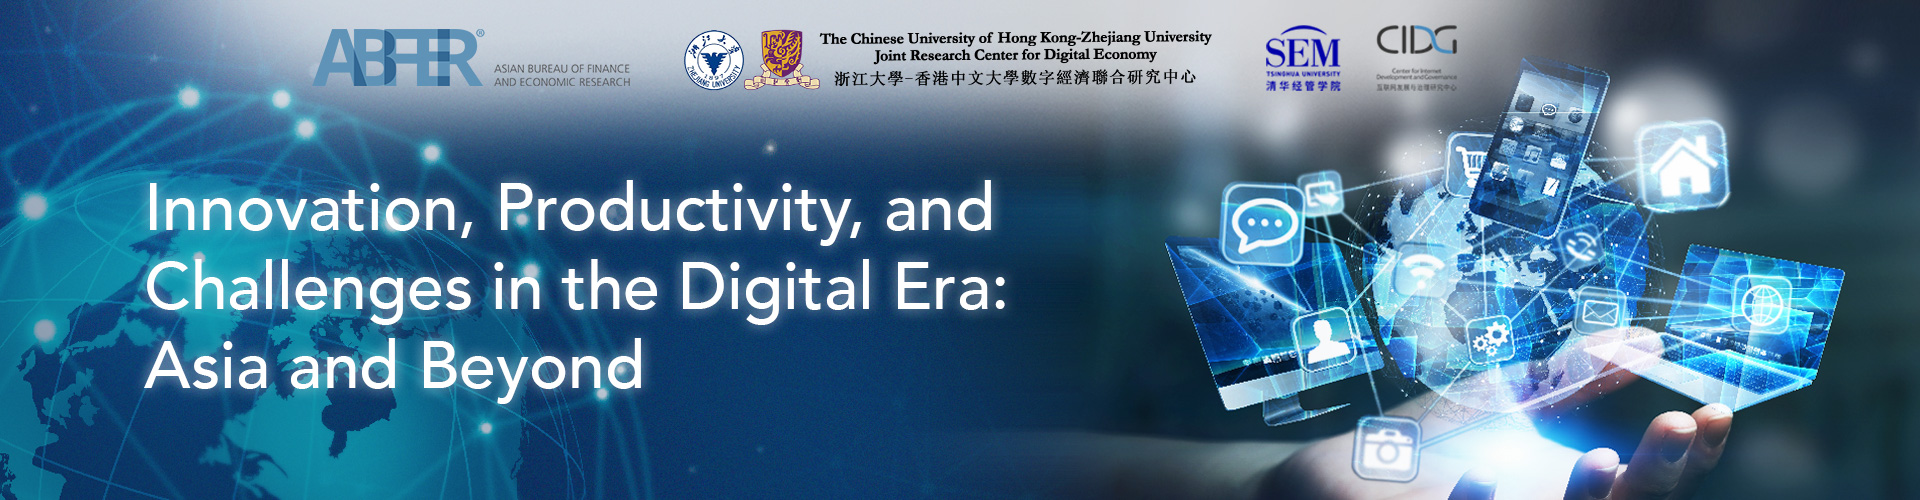 【Webinar Series】Digitization and Artificial Intelligence: Challenges and Opportunities for Policy